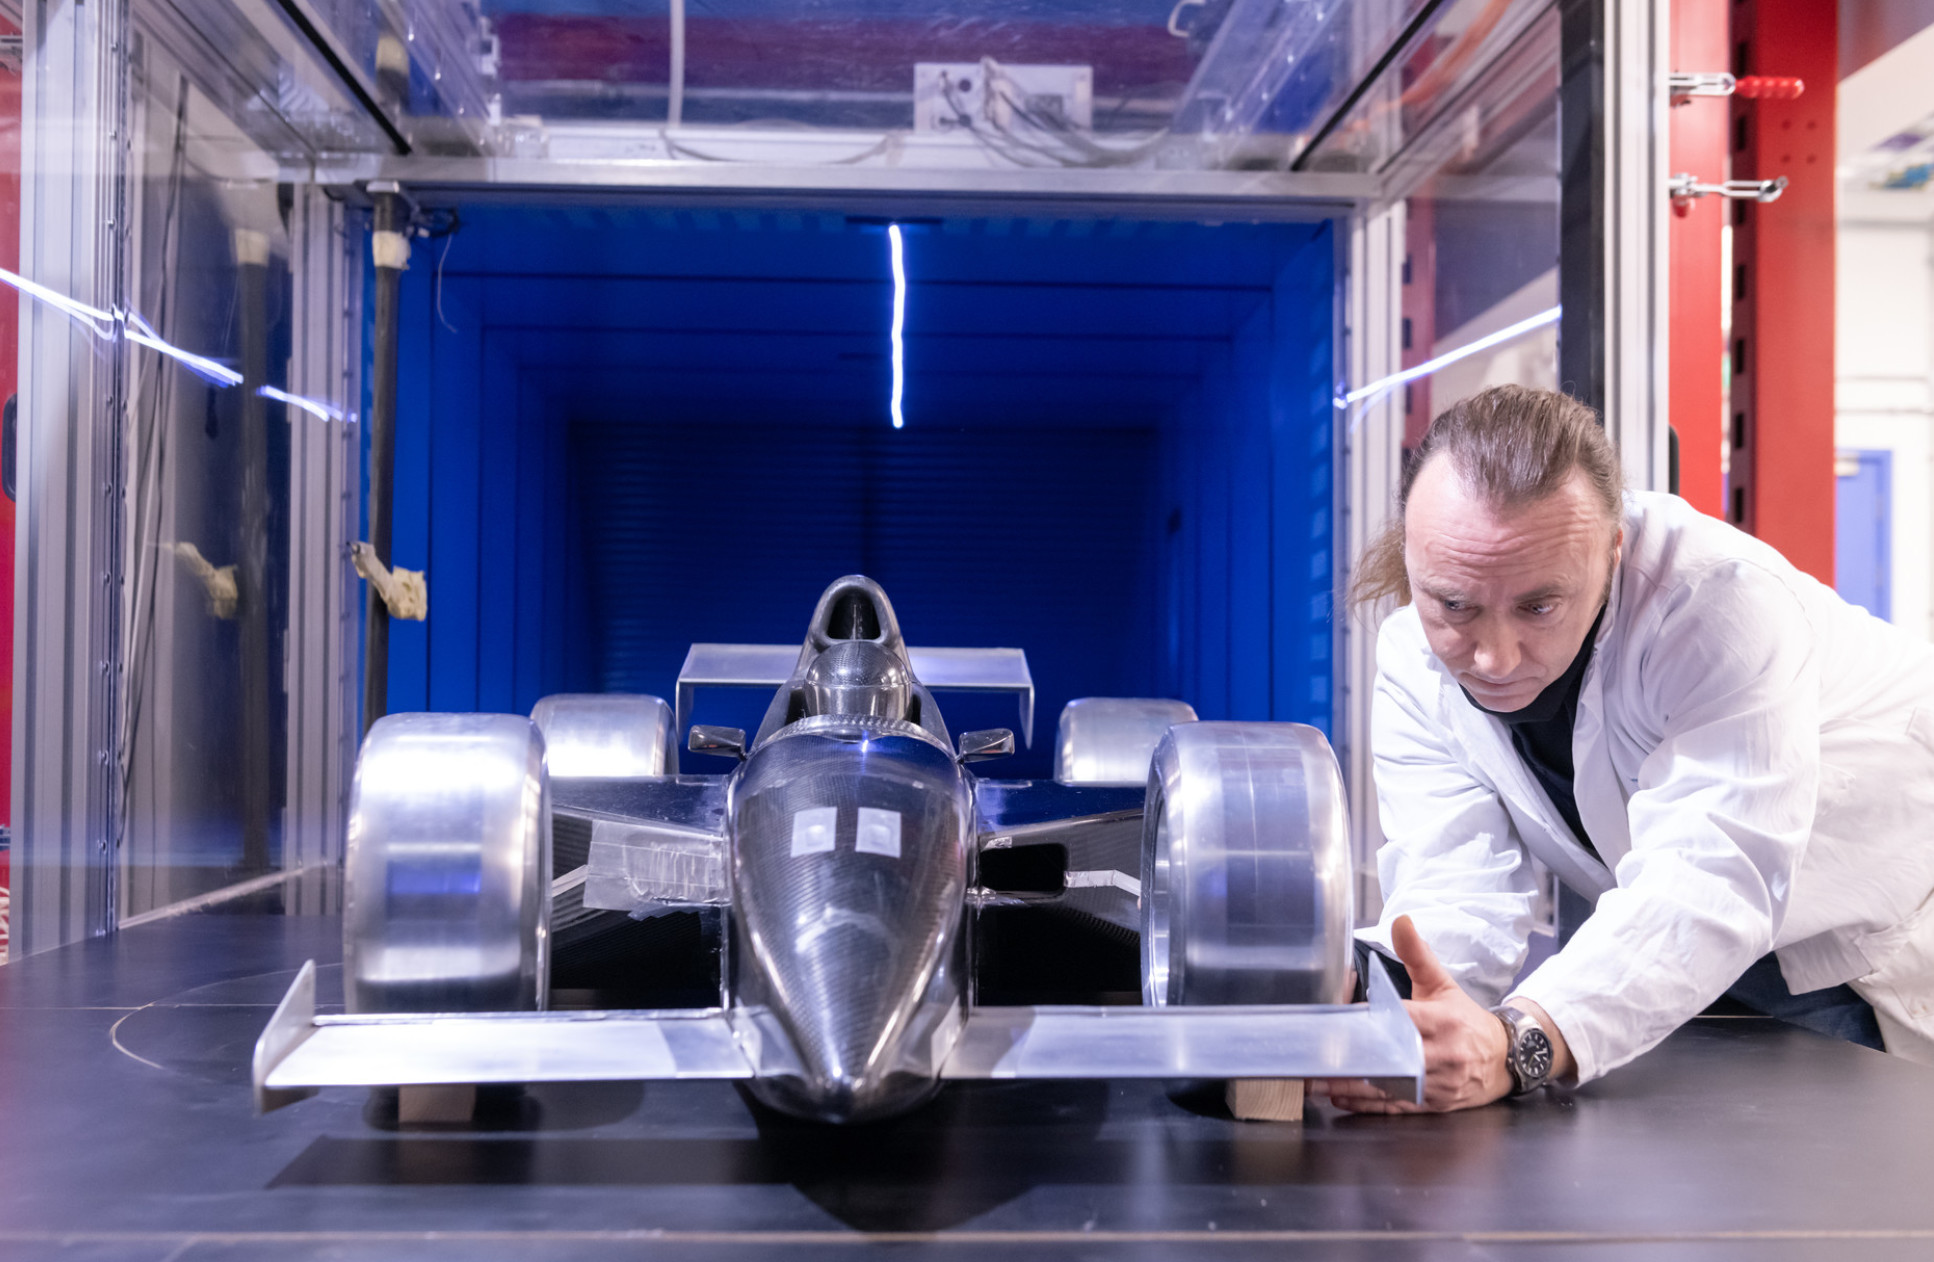 Wind tunnel research at Imperial